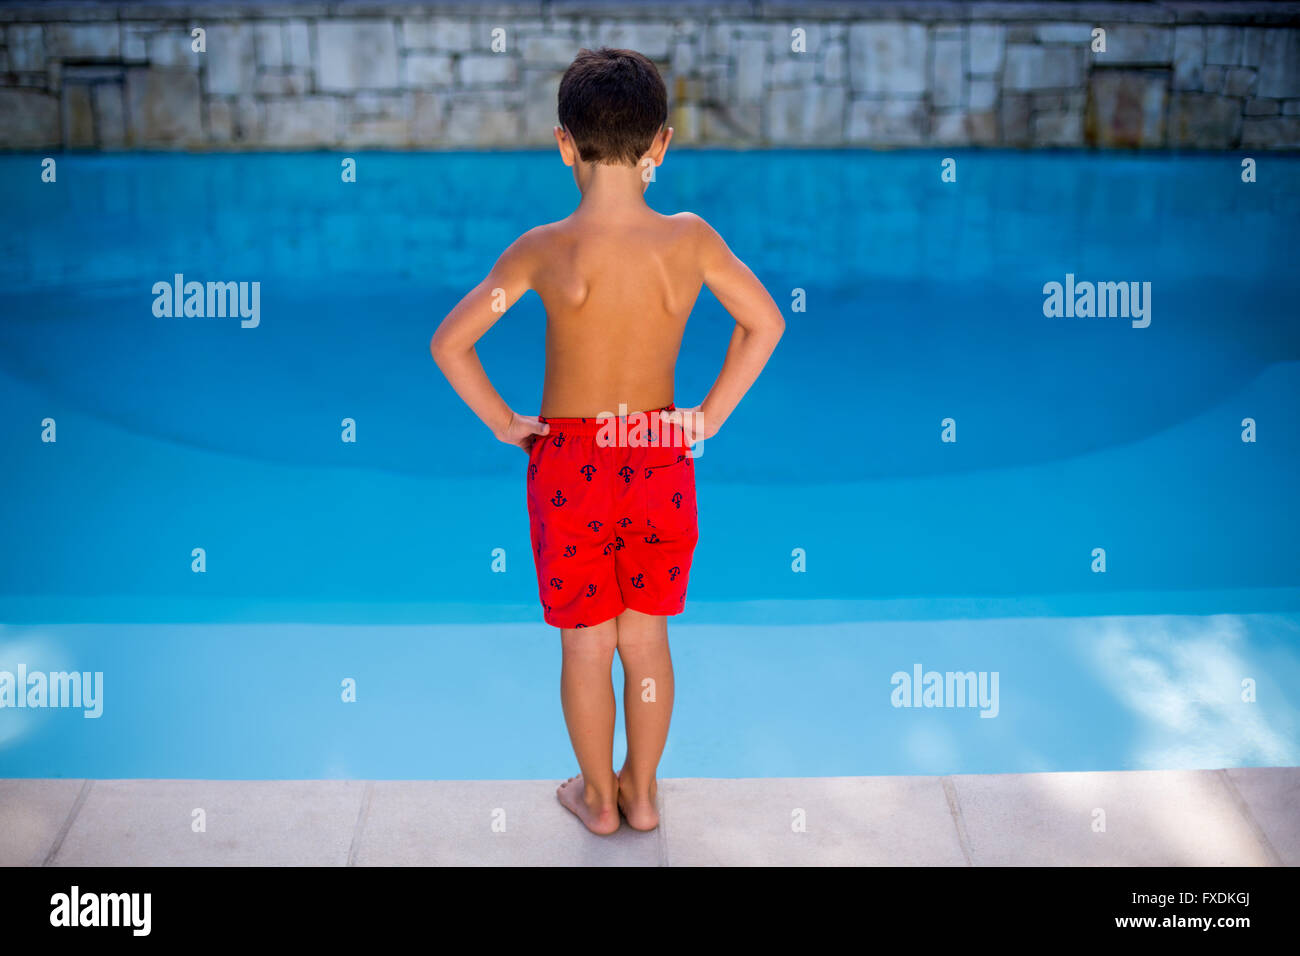 Shirtless boy standing in swimming pool Banque D'Images